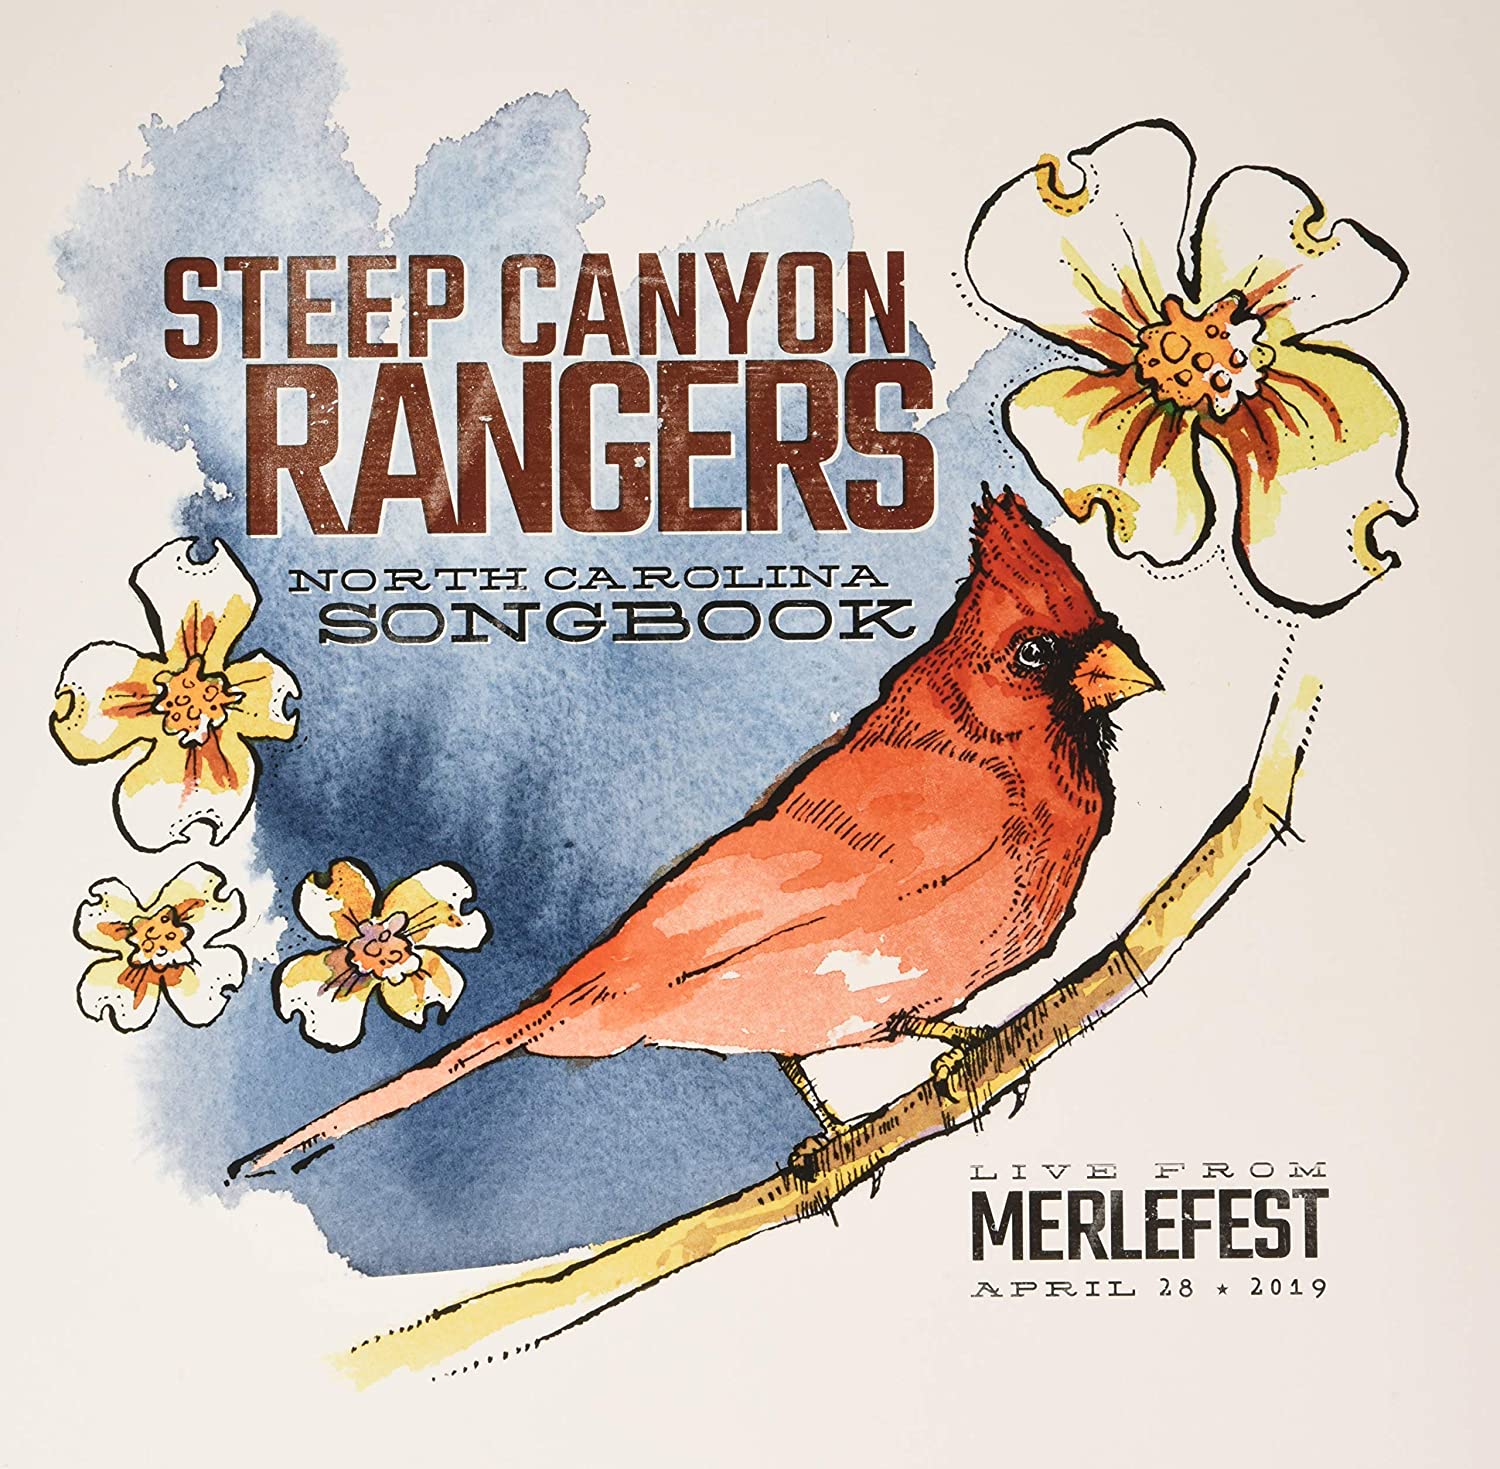 Steep Canyon Rangers - North Carolina Songbook - Live From Merlefest April 28 2019 [Tri-Color Vinyl]